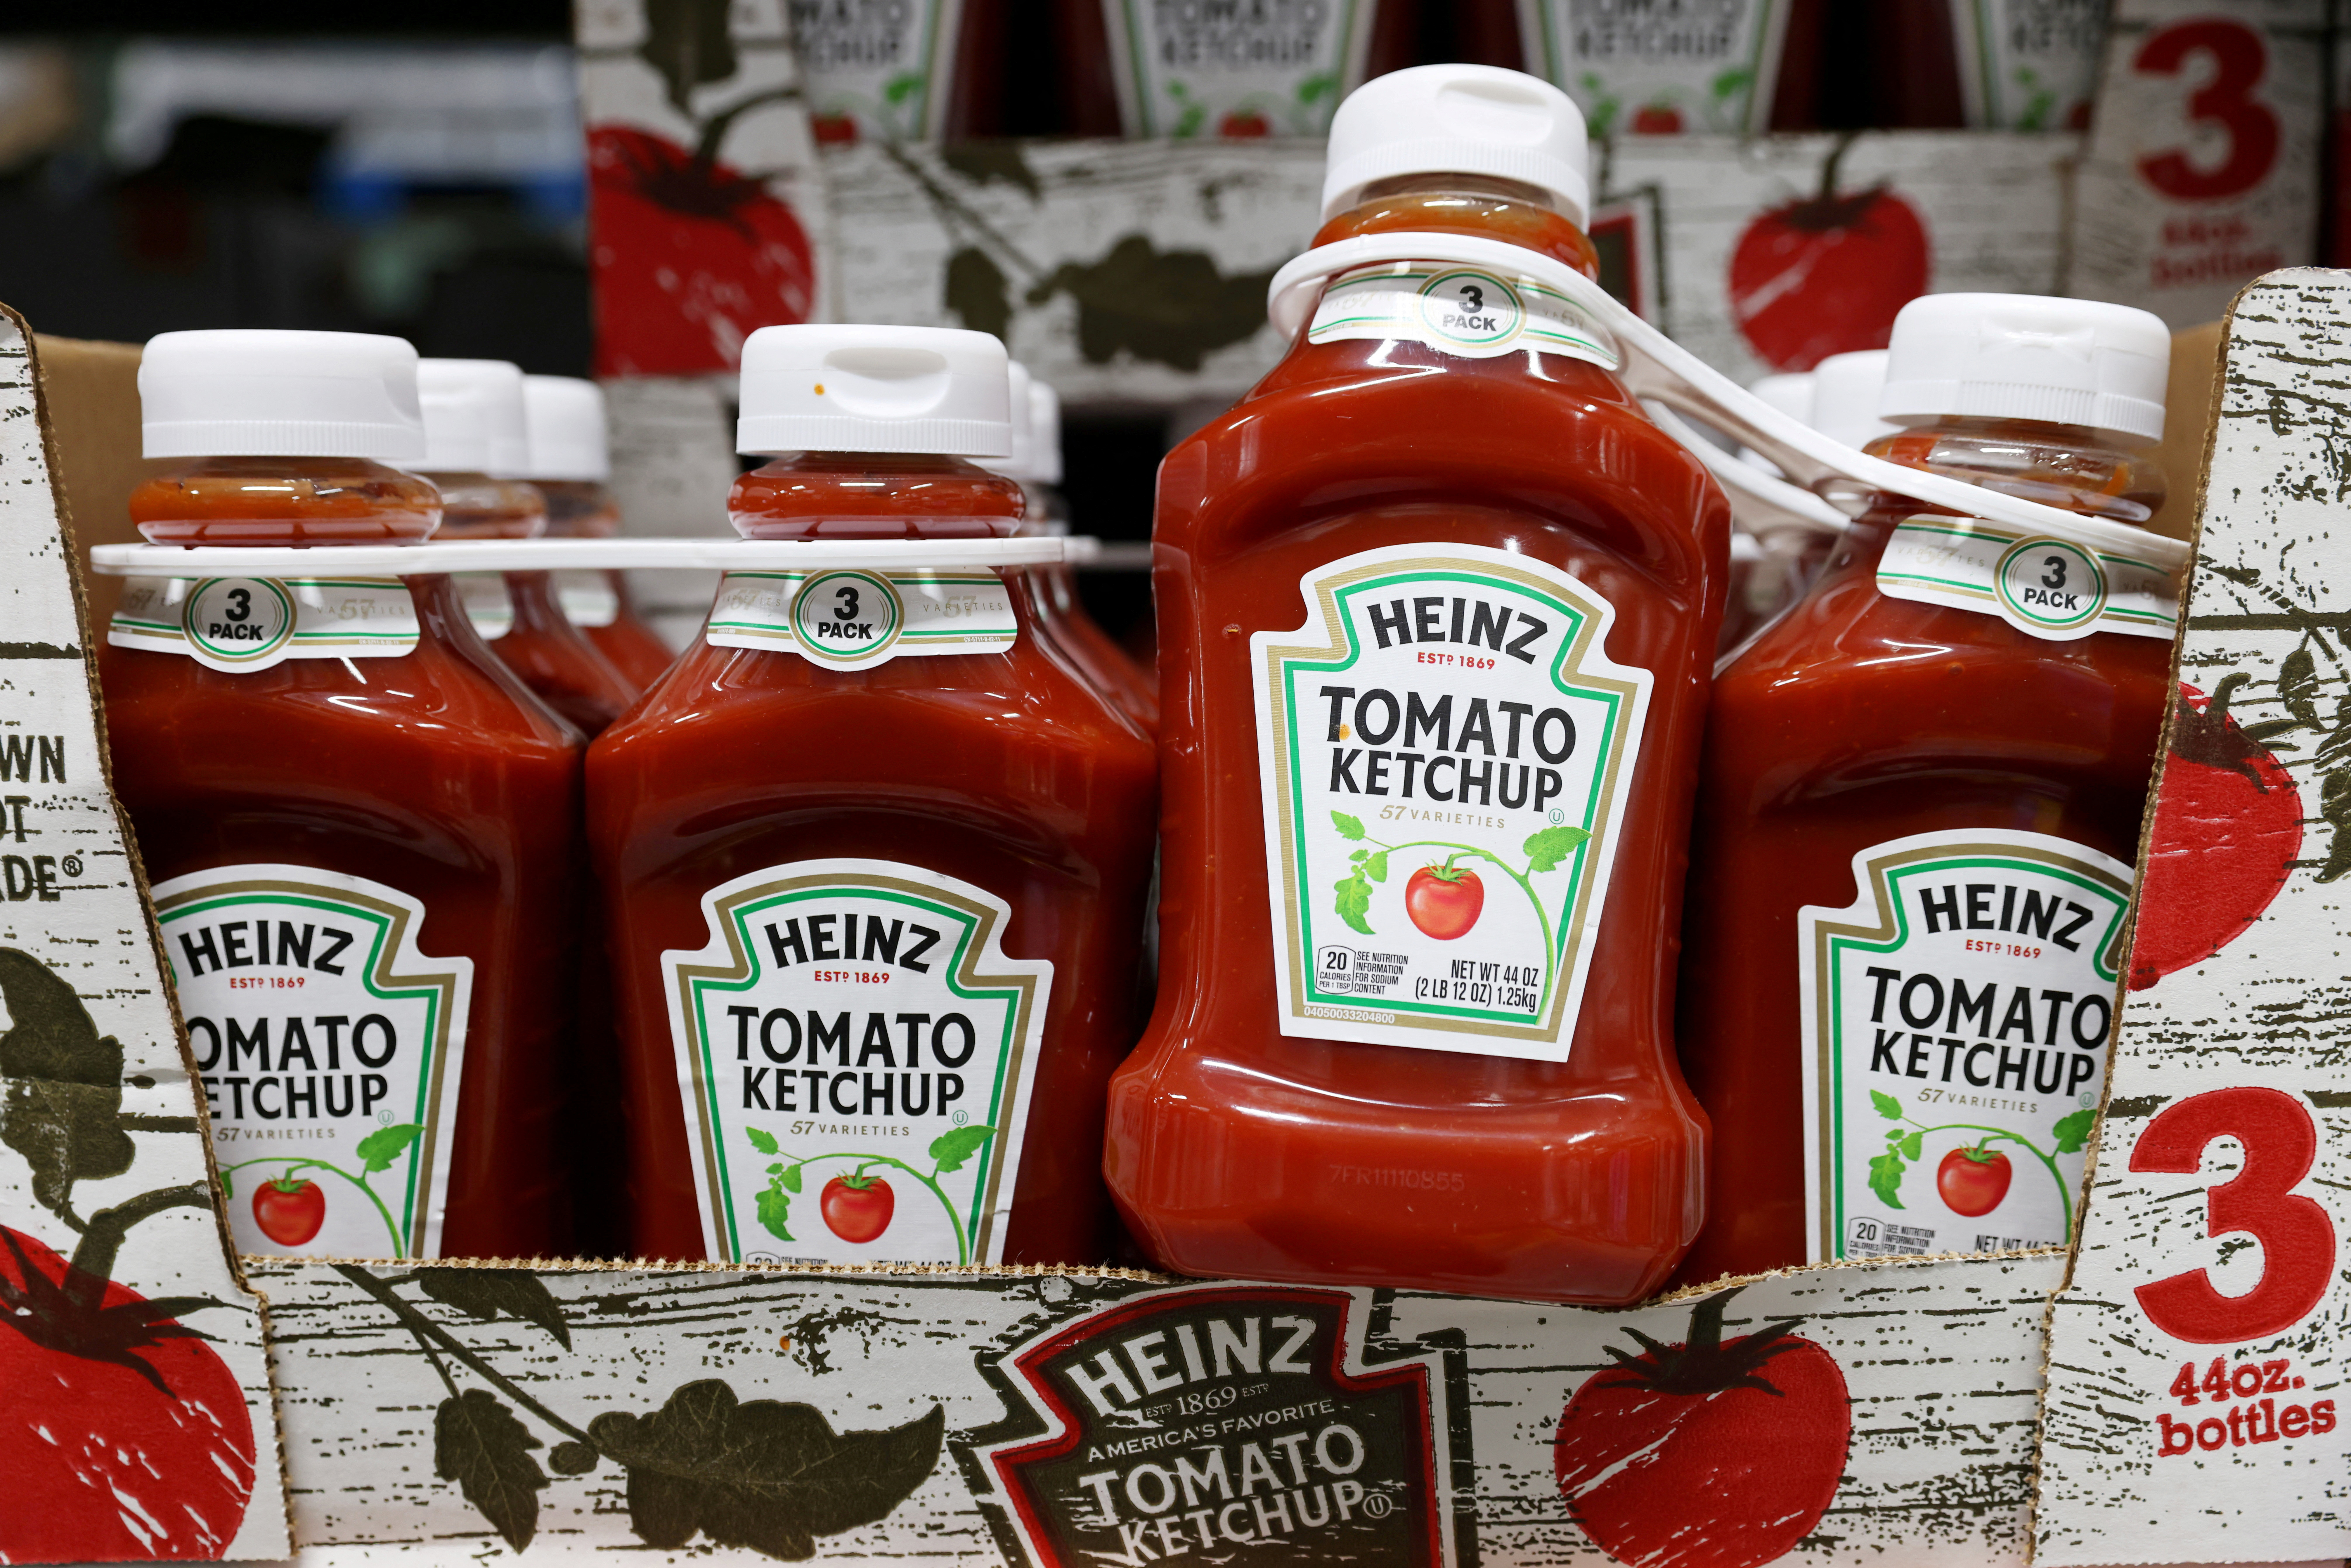 Bottles of Heinz Tomato Ketchup, owned by the Kraft Heinz Company